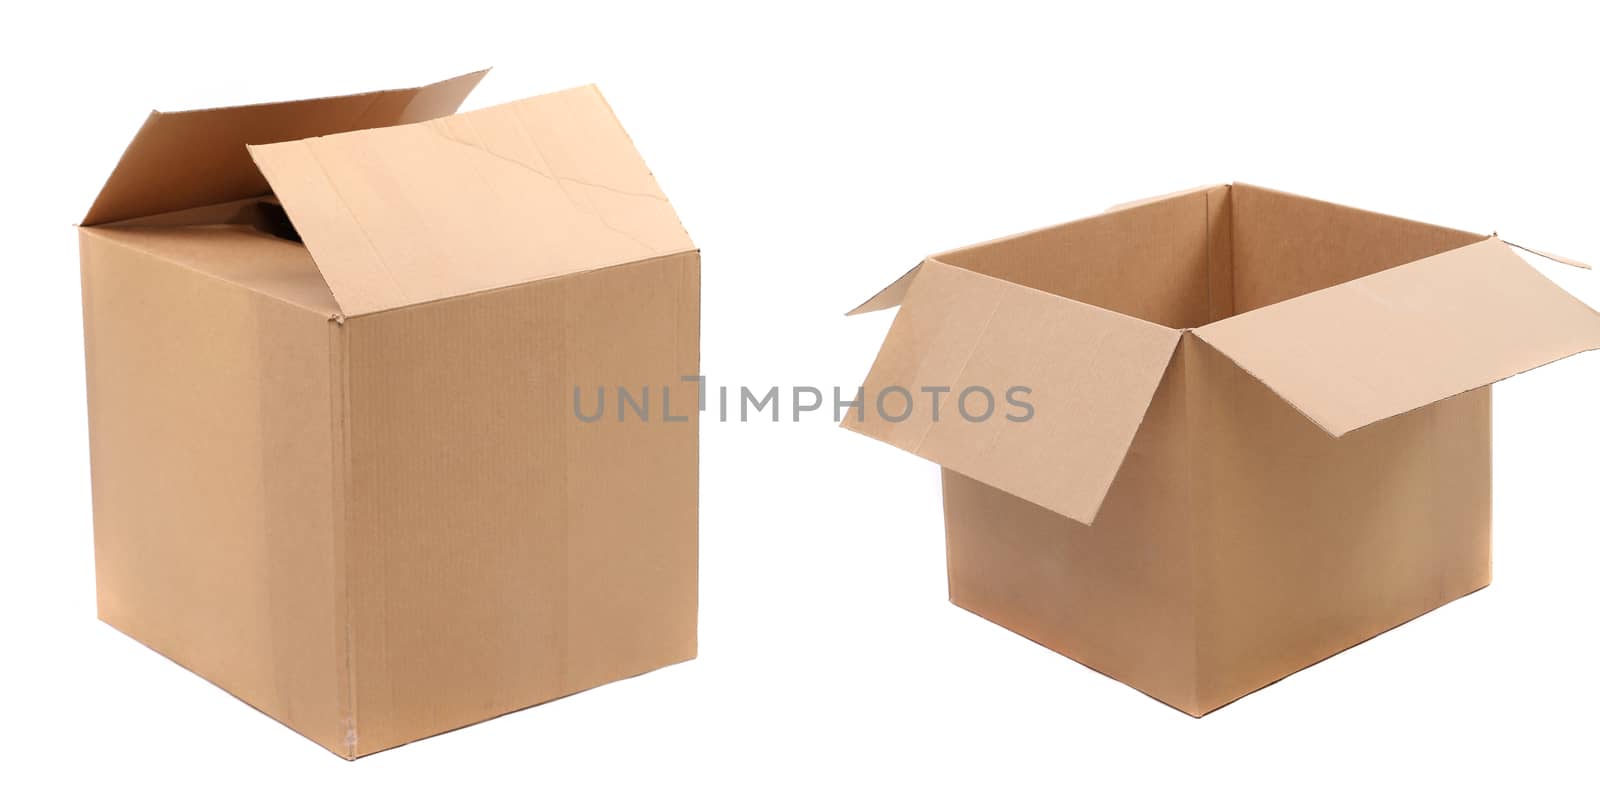 opened and closed corrugated cardboard boxes by indigolotos